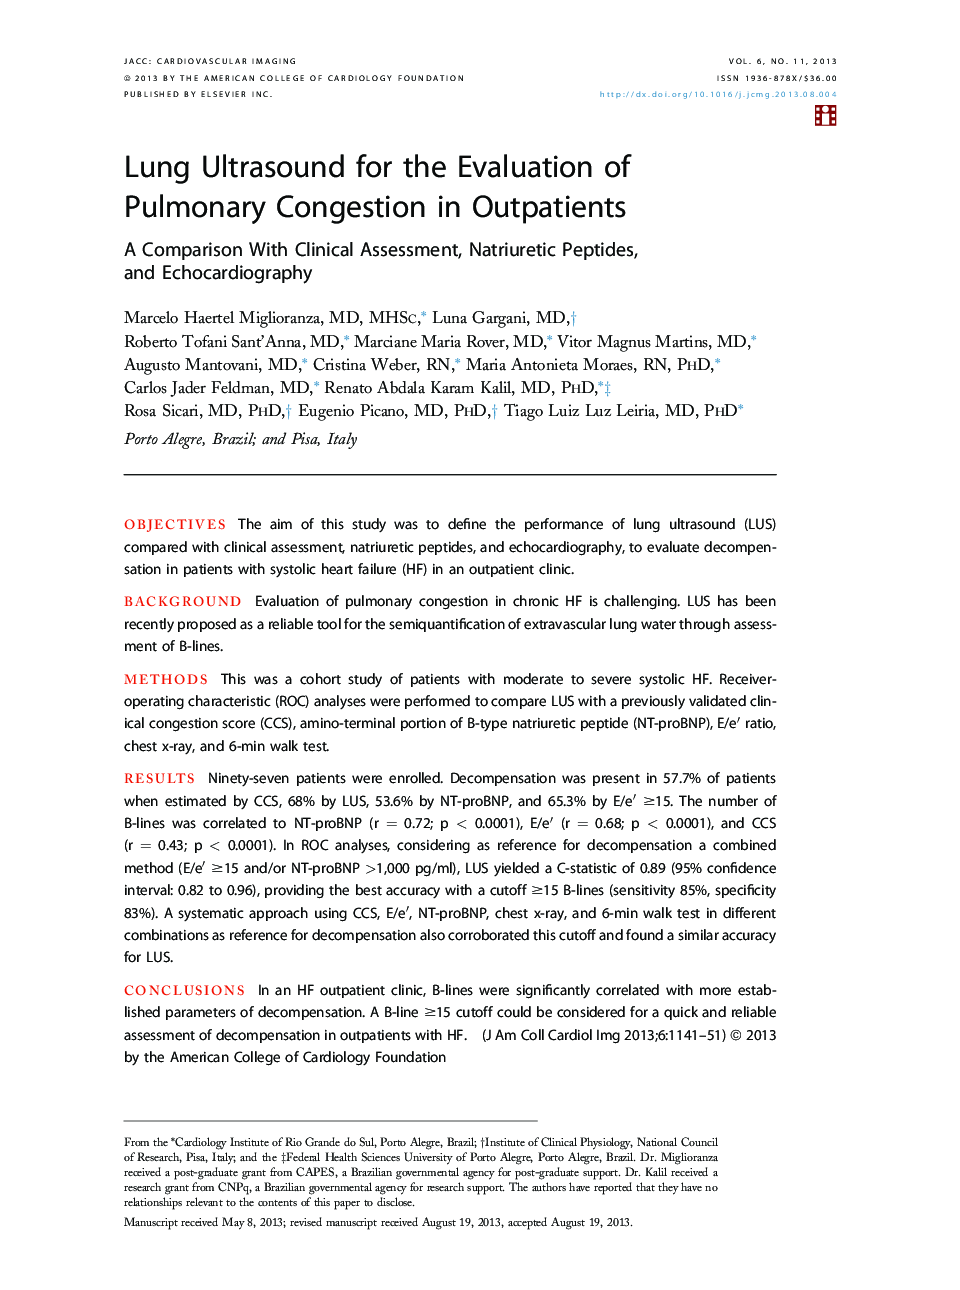 Lung Ultrasound for the Evaluation of Pulmonary Congestion in Outpatients : A Comparison With Clinical Assessment, Natriuretic Peptides, and Echocardiography